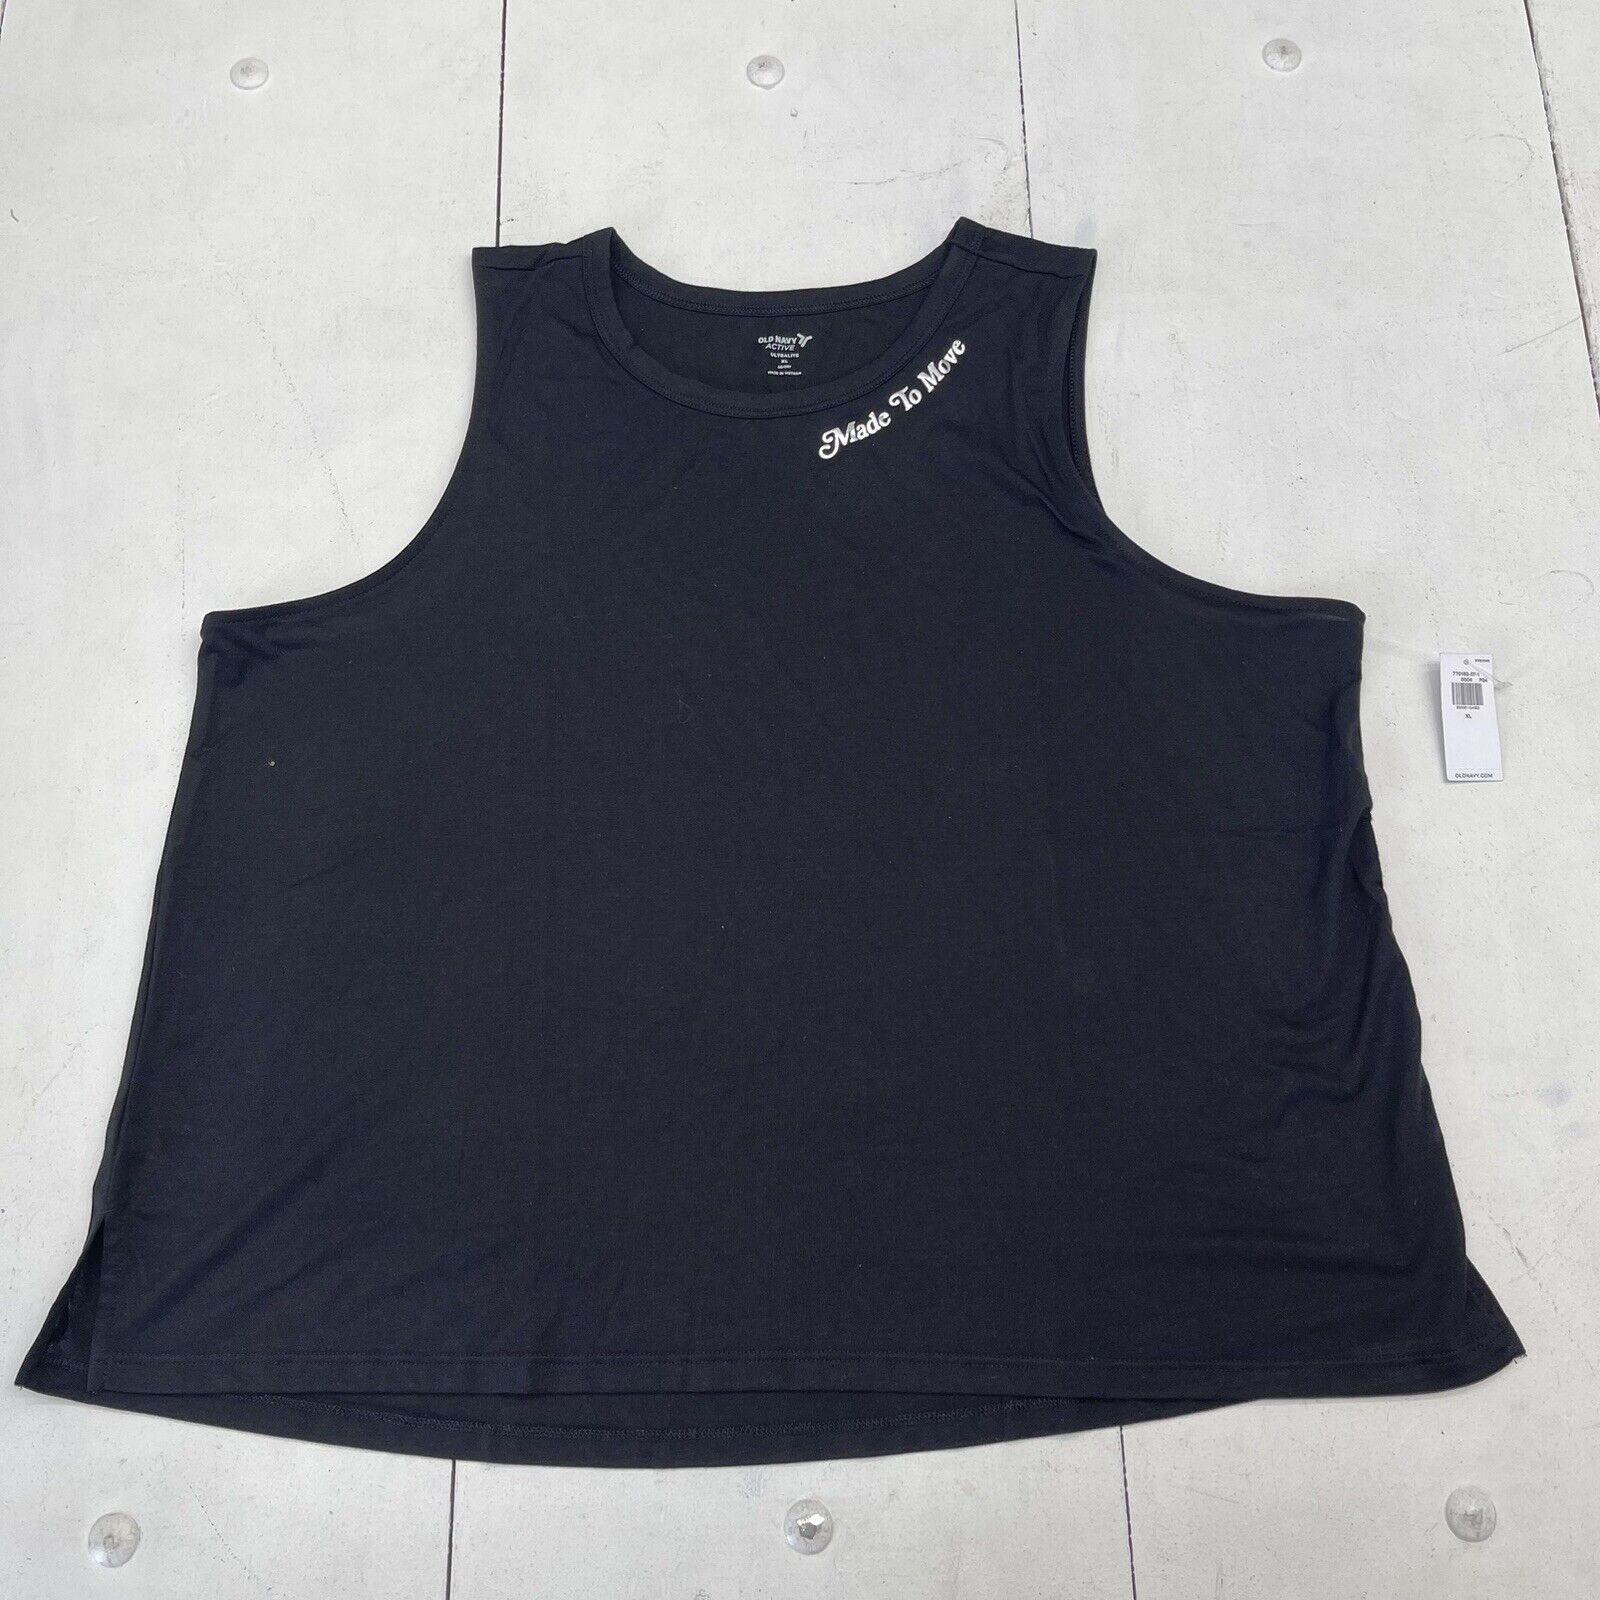 Old Navy Black UltraLite Cropped Graphic Tank Women’s XL New